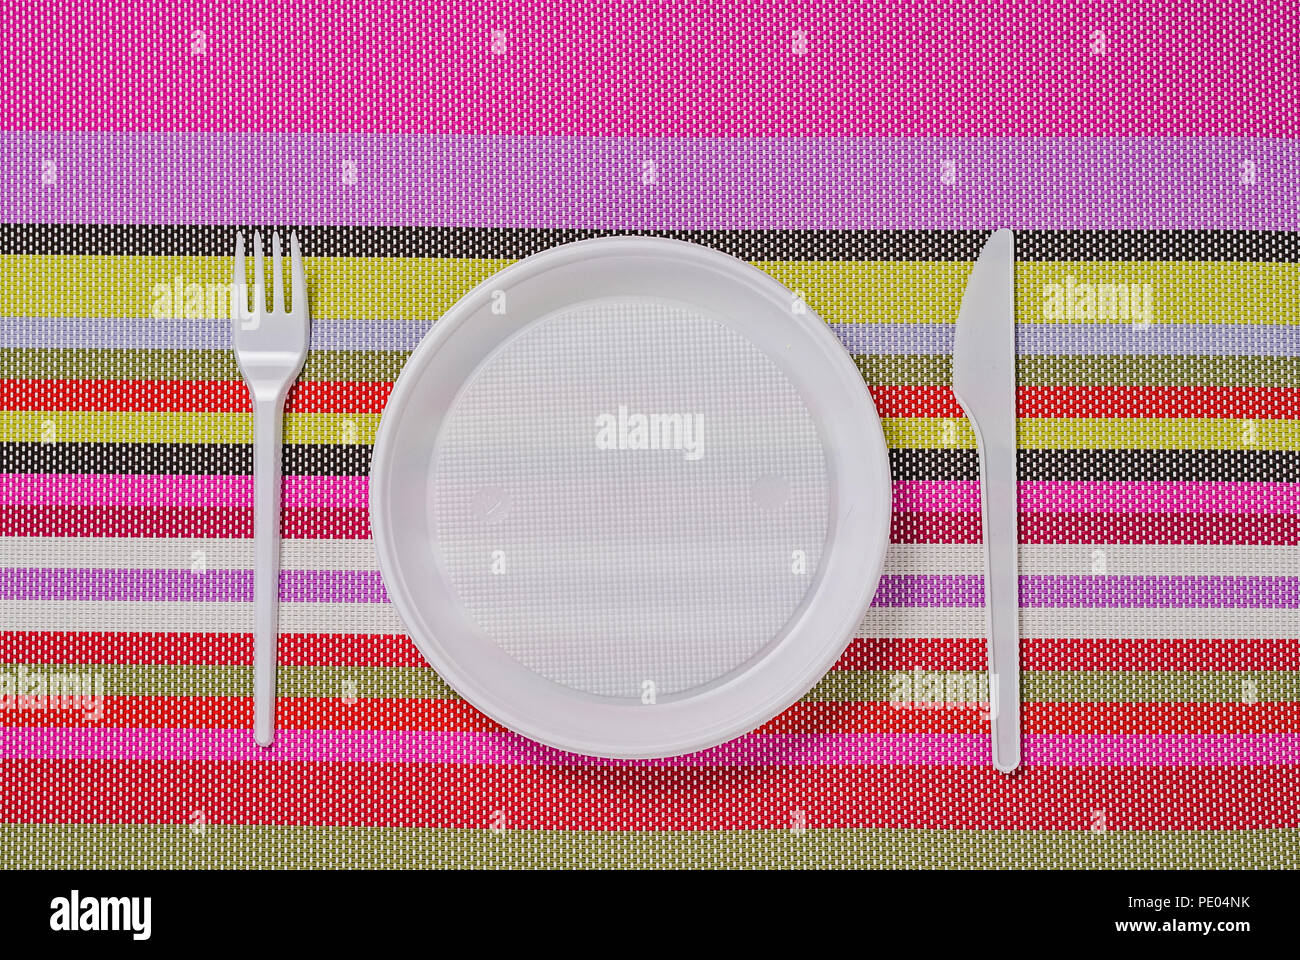 white plastic utensils, fork, plate and knife on a colored striped napkin Stock Photo